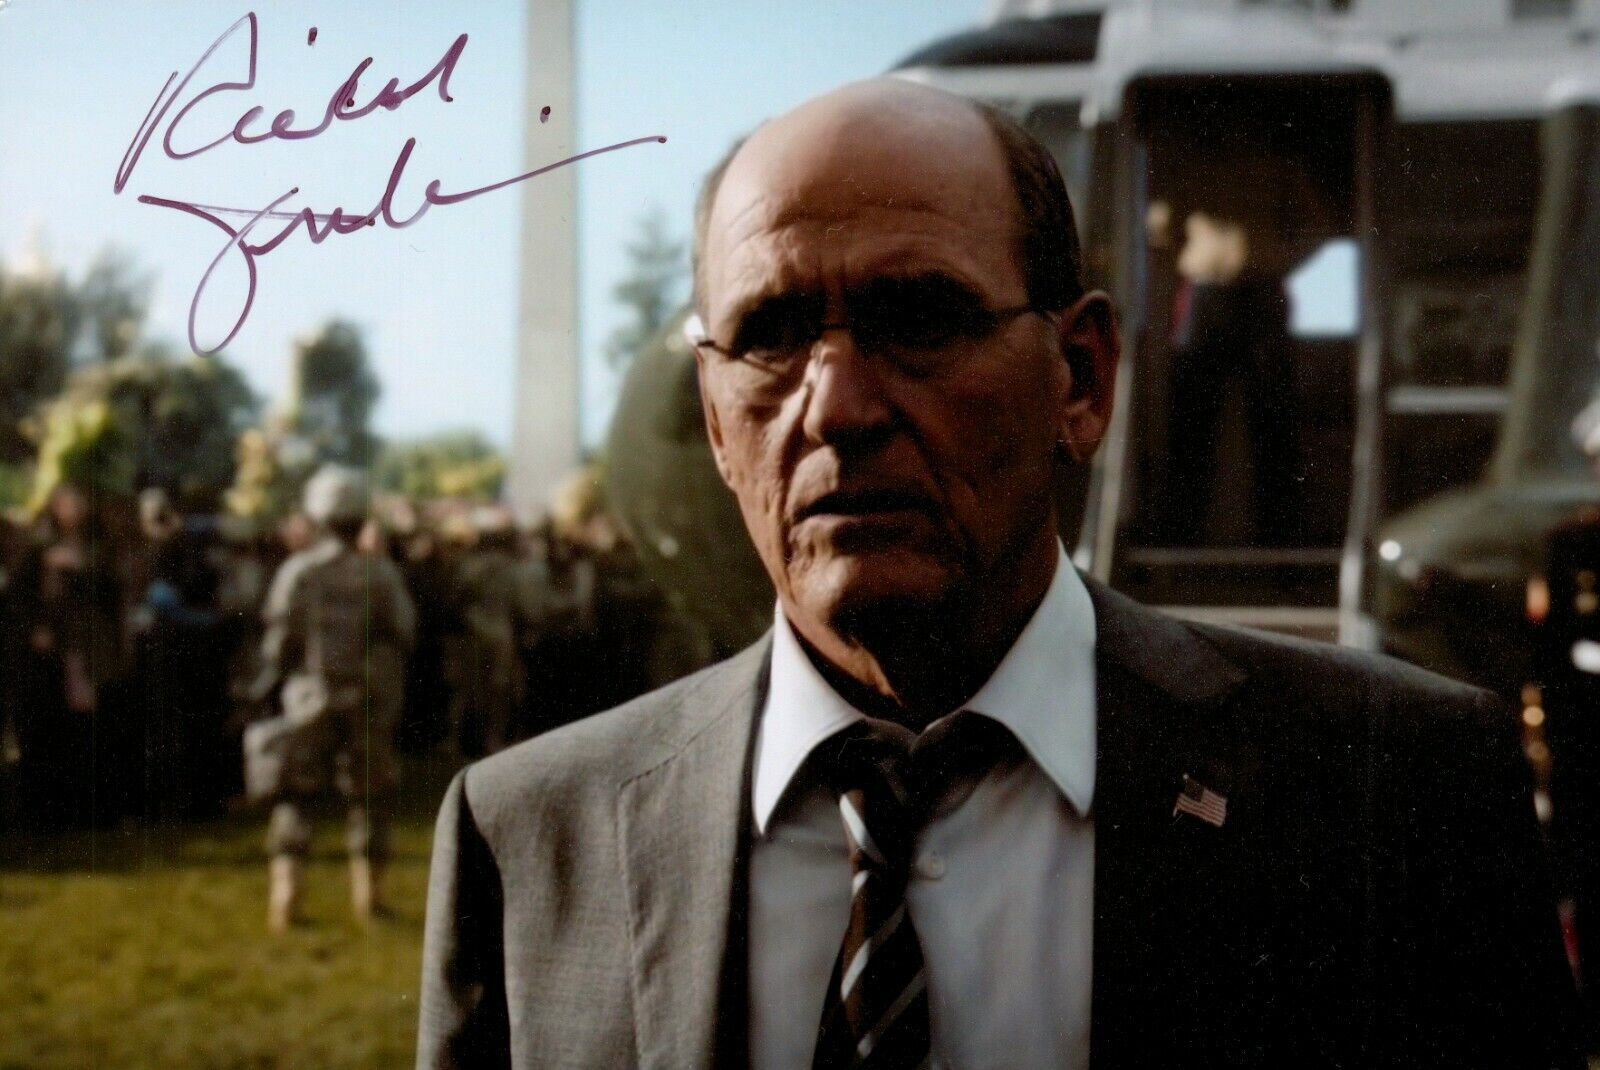 Richard Jenkins Signed 6x4 Photo Poster painting Step Brothers Let Me In LBJ Autograph + COA